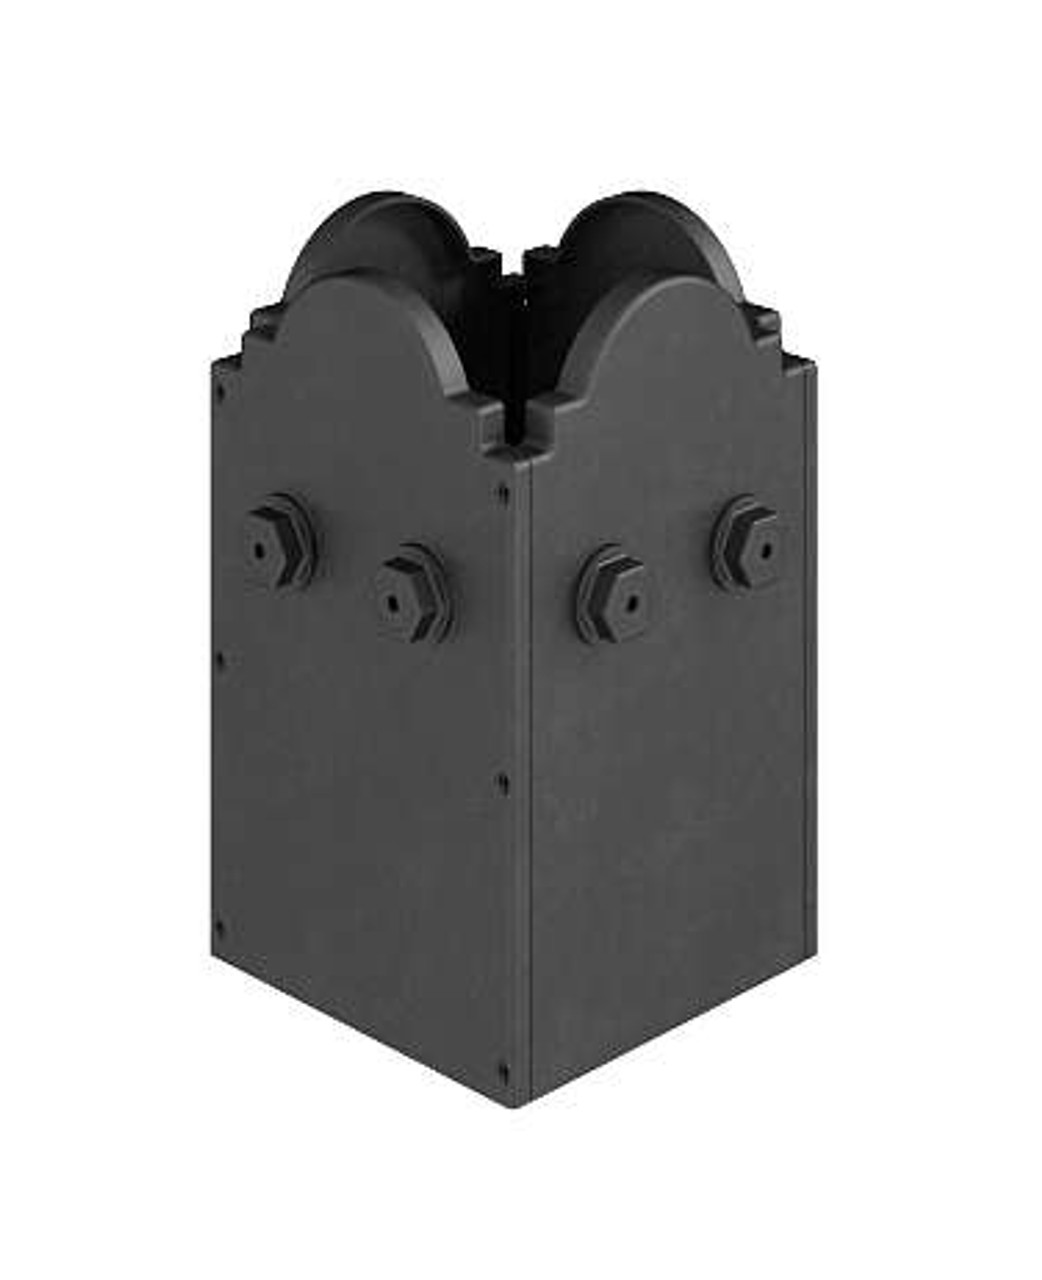 Simpson APBDW66 Outdoor Accents Mission Post Base Cover for 6x6 Post 8 Pk